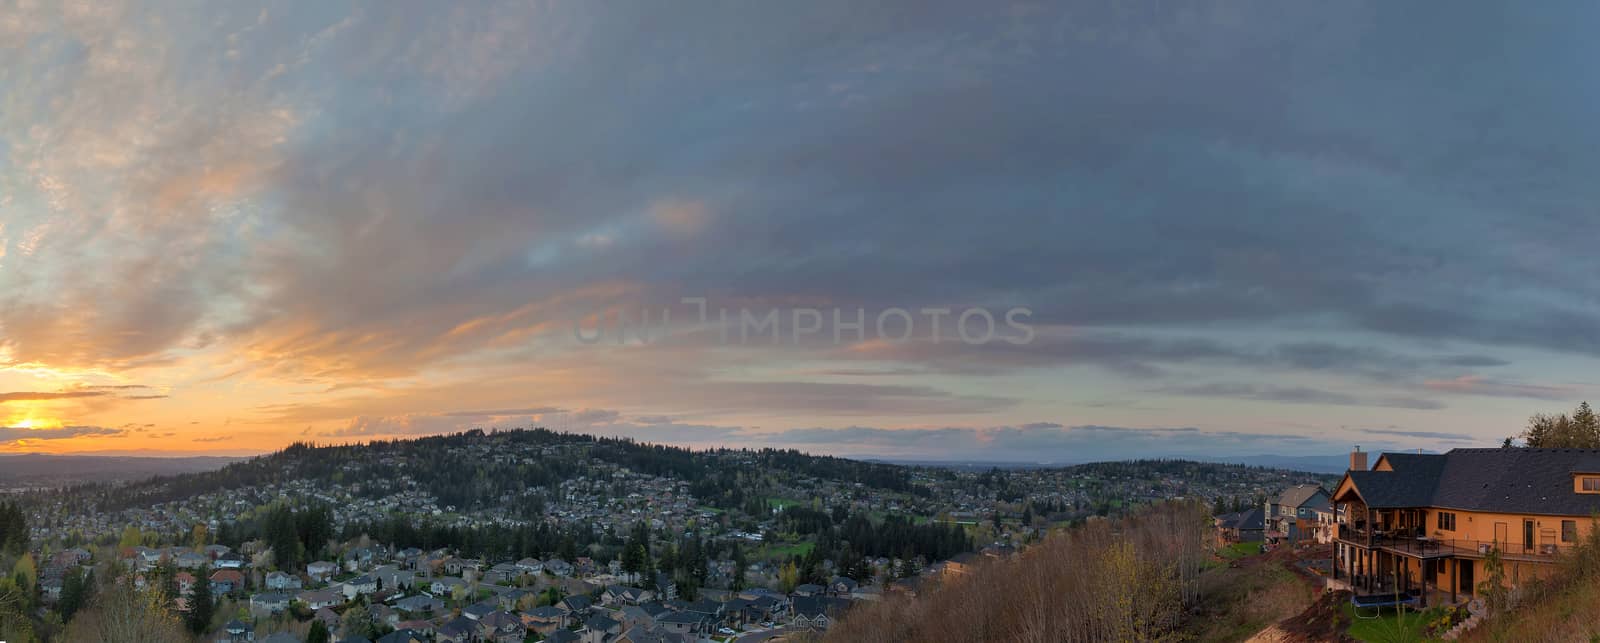 Sunset View Over Happy Valley Panorama by jpldesigns